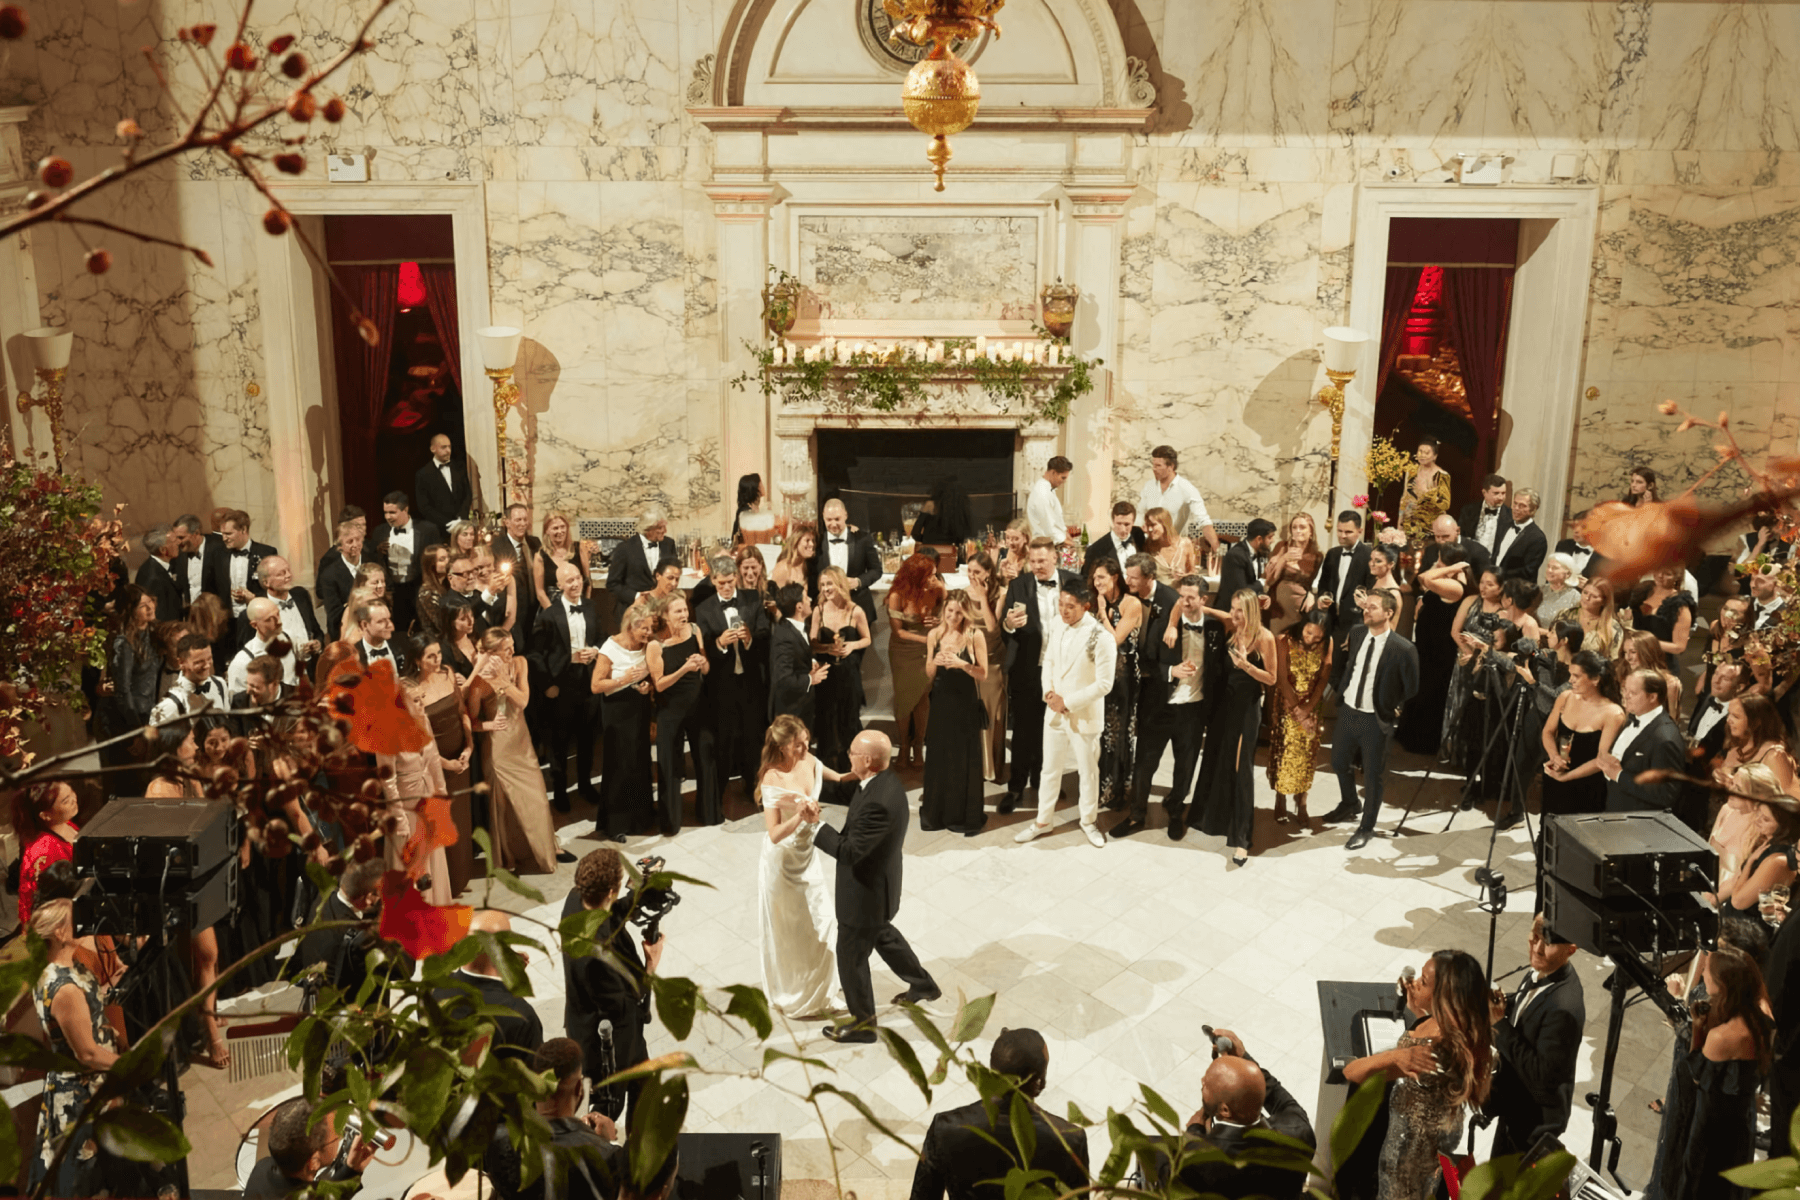 A father and daughter share a wedding dance surrounded by guests in an opulent room with marble walls and tall ceilings.